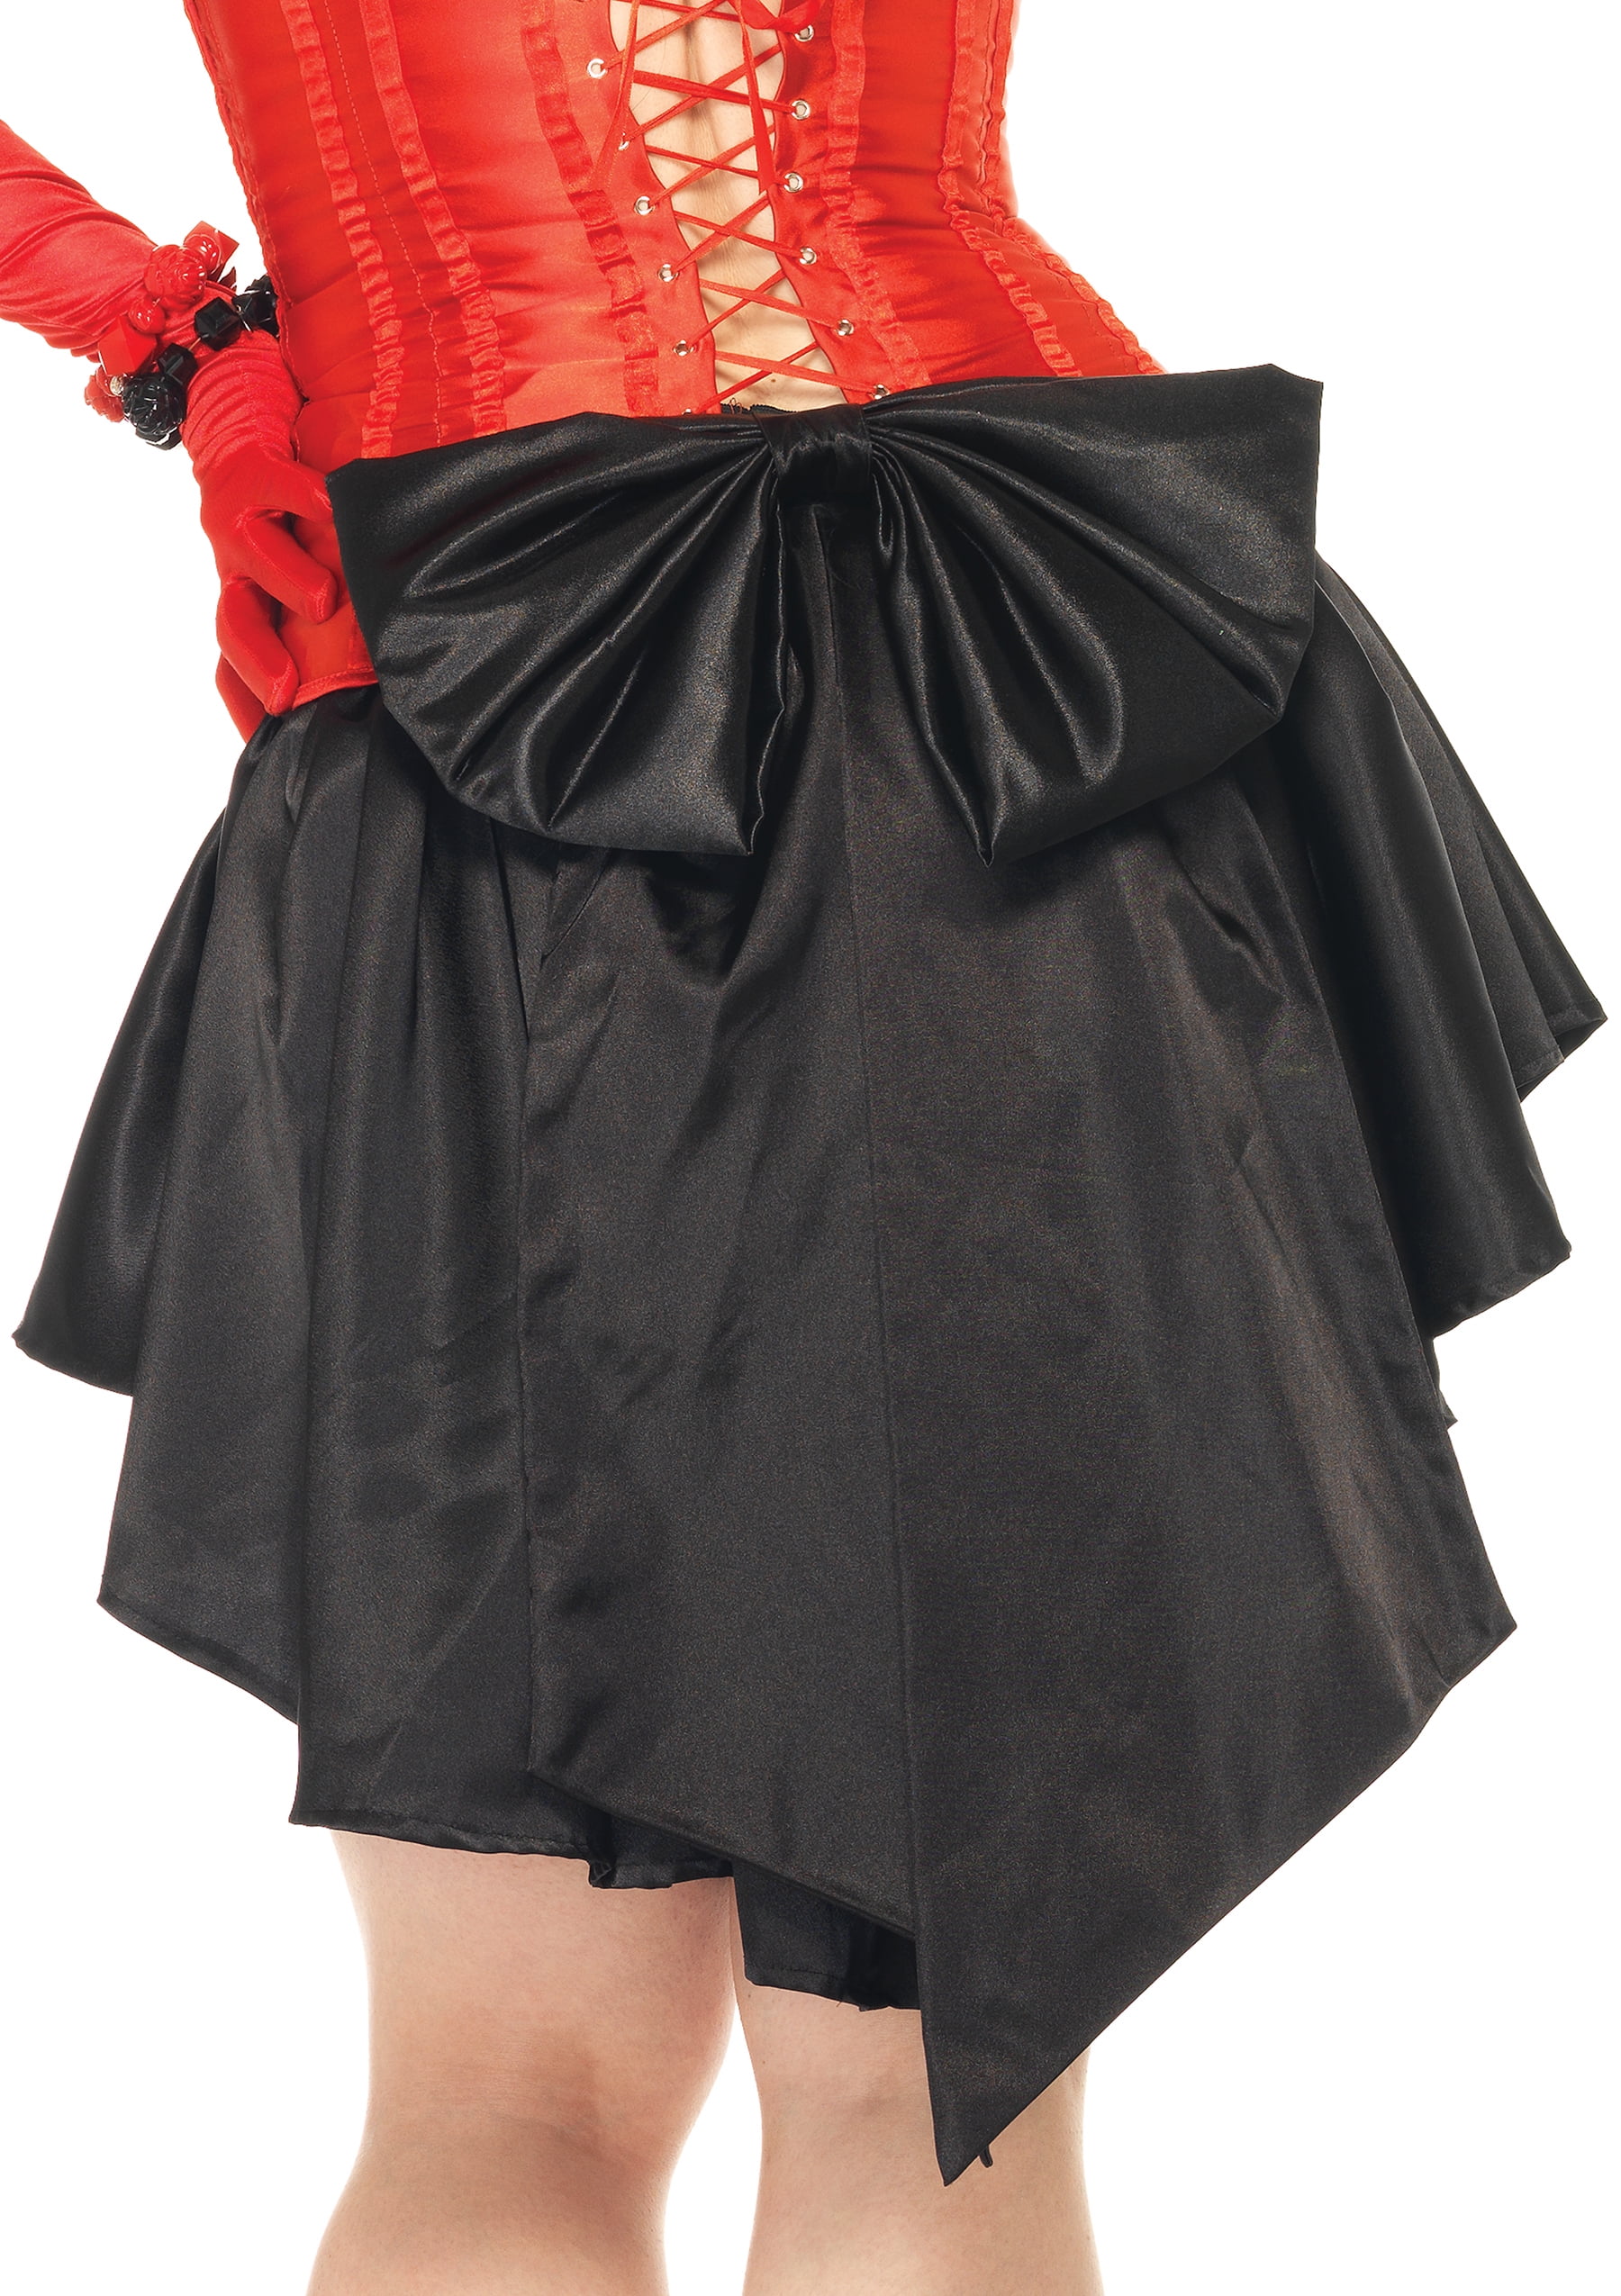 Ladies Burlesque Party Saloon Can Can Show Girl Satin Skirts Black